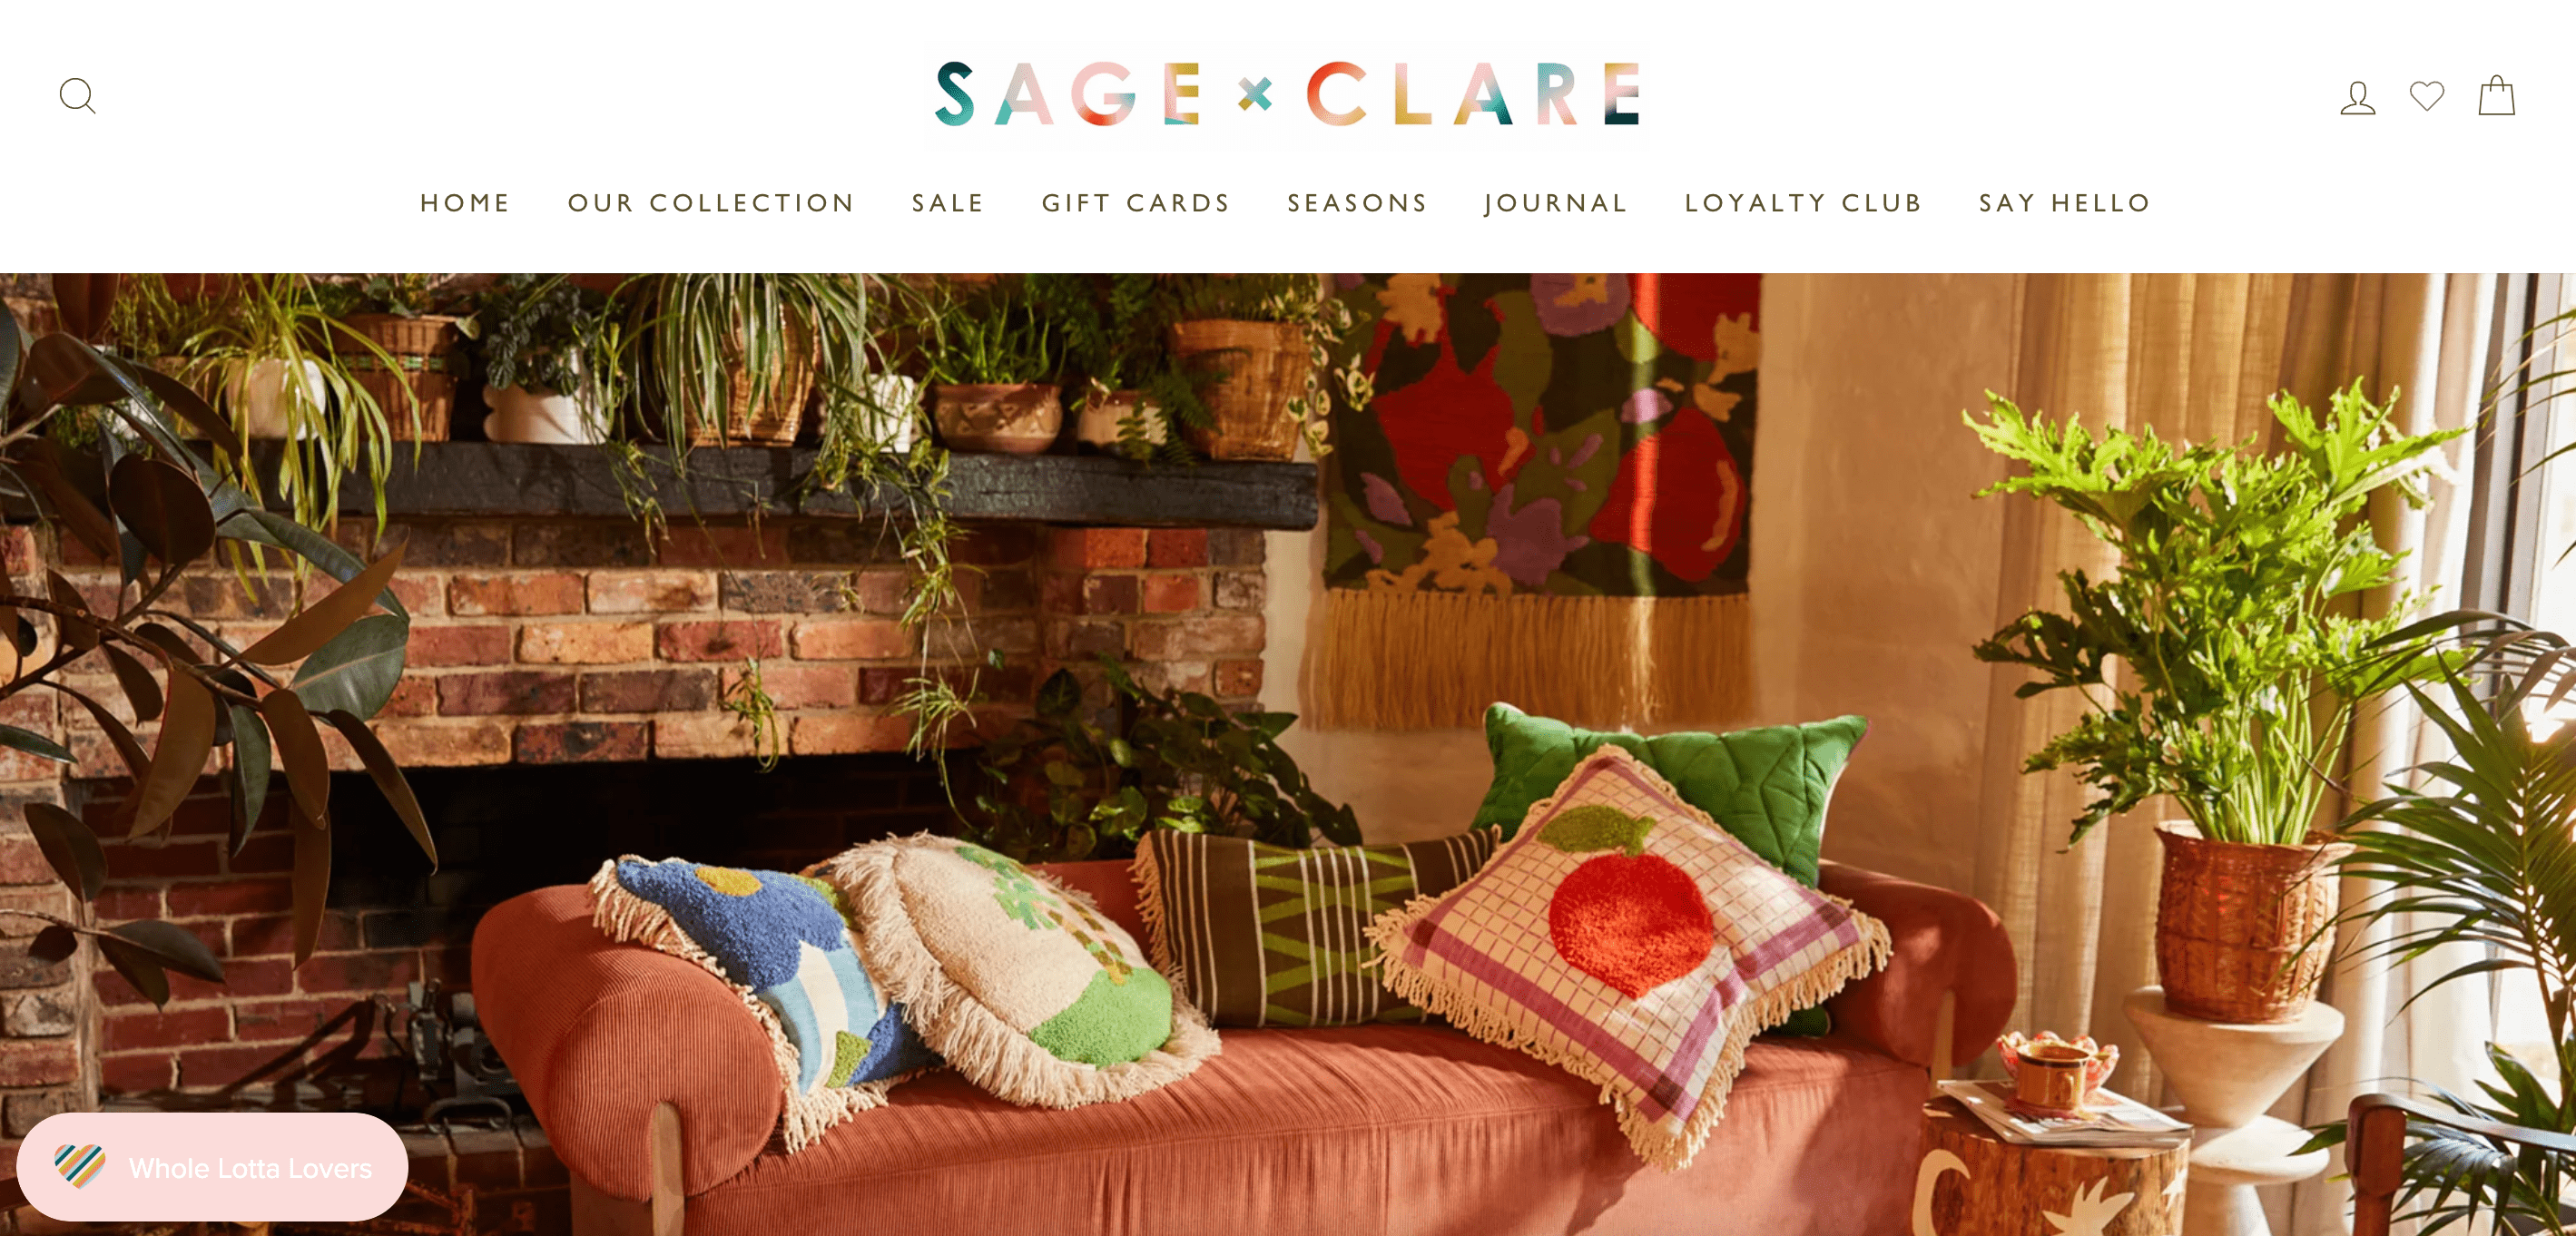 home and garden loyalty program examples - sage and clare homepage screenshot